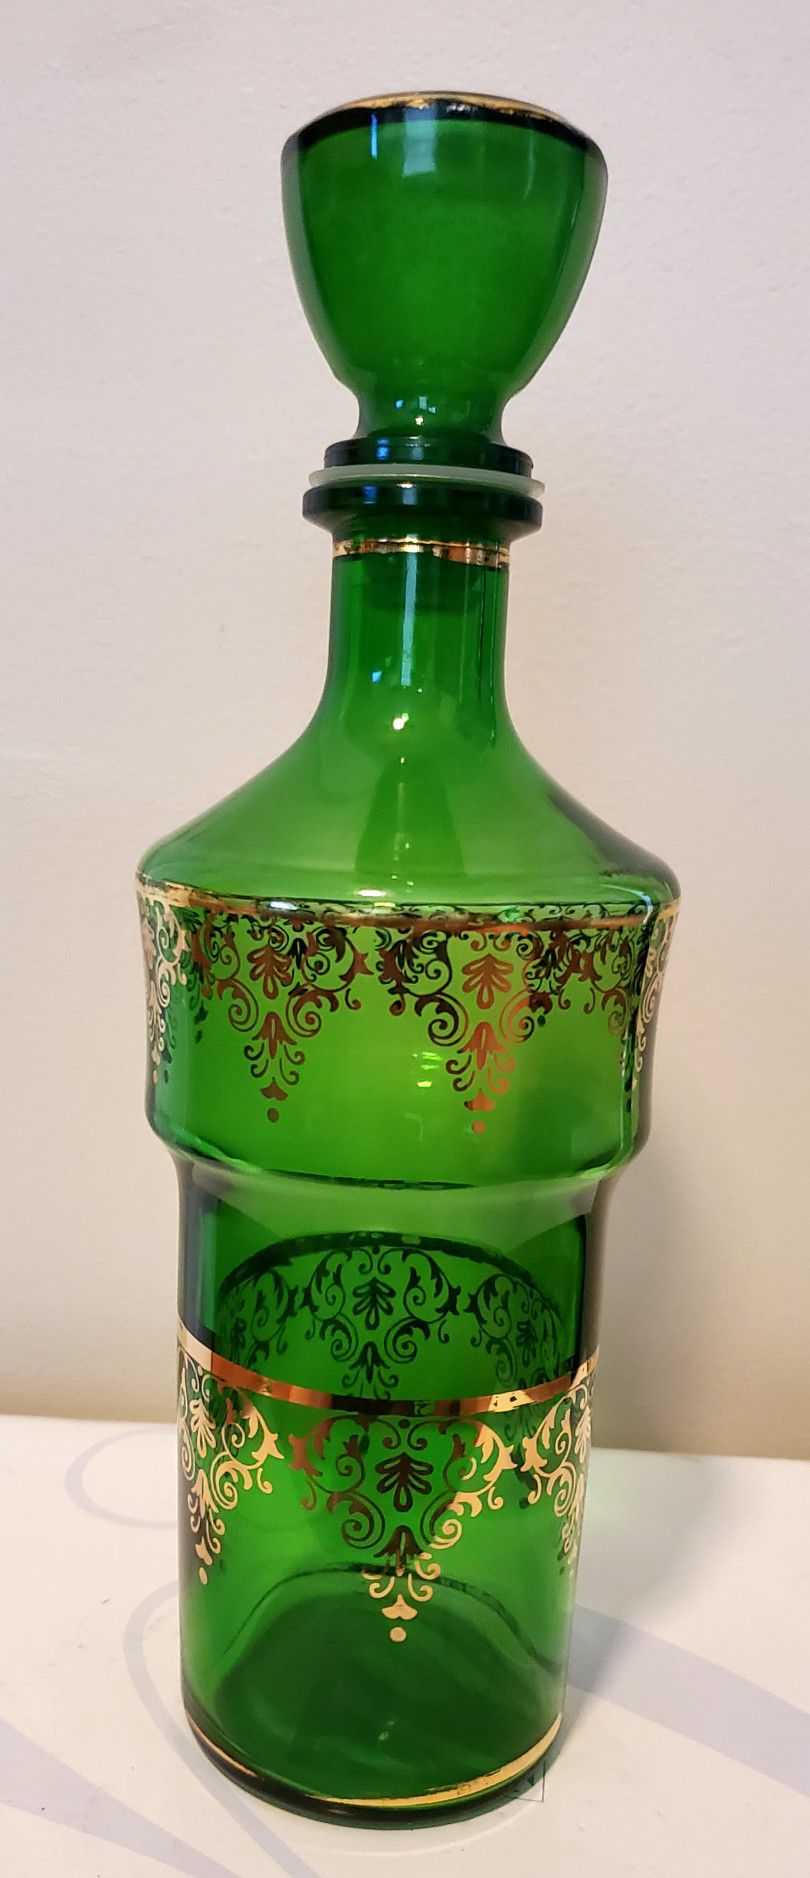 Vintage Emerald Green Decanter with Glasses